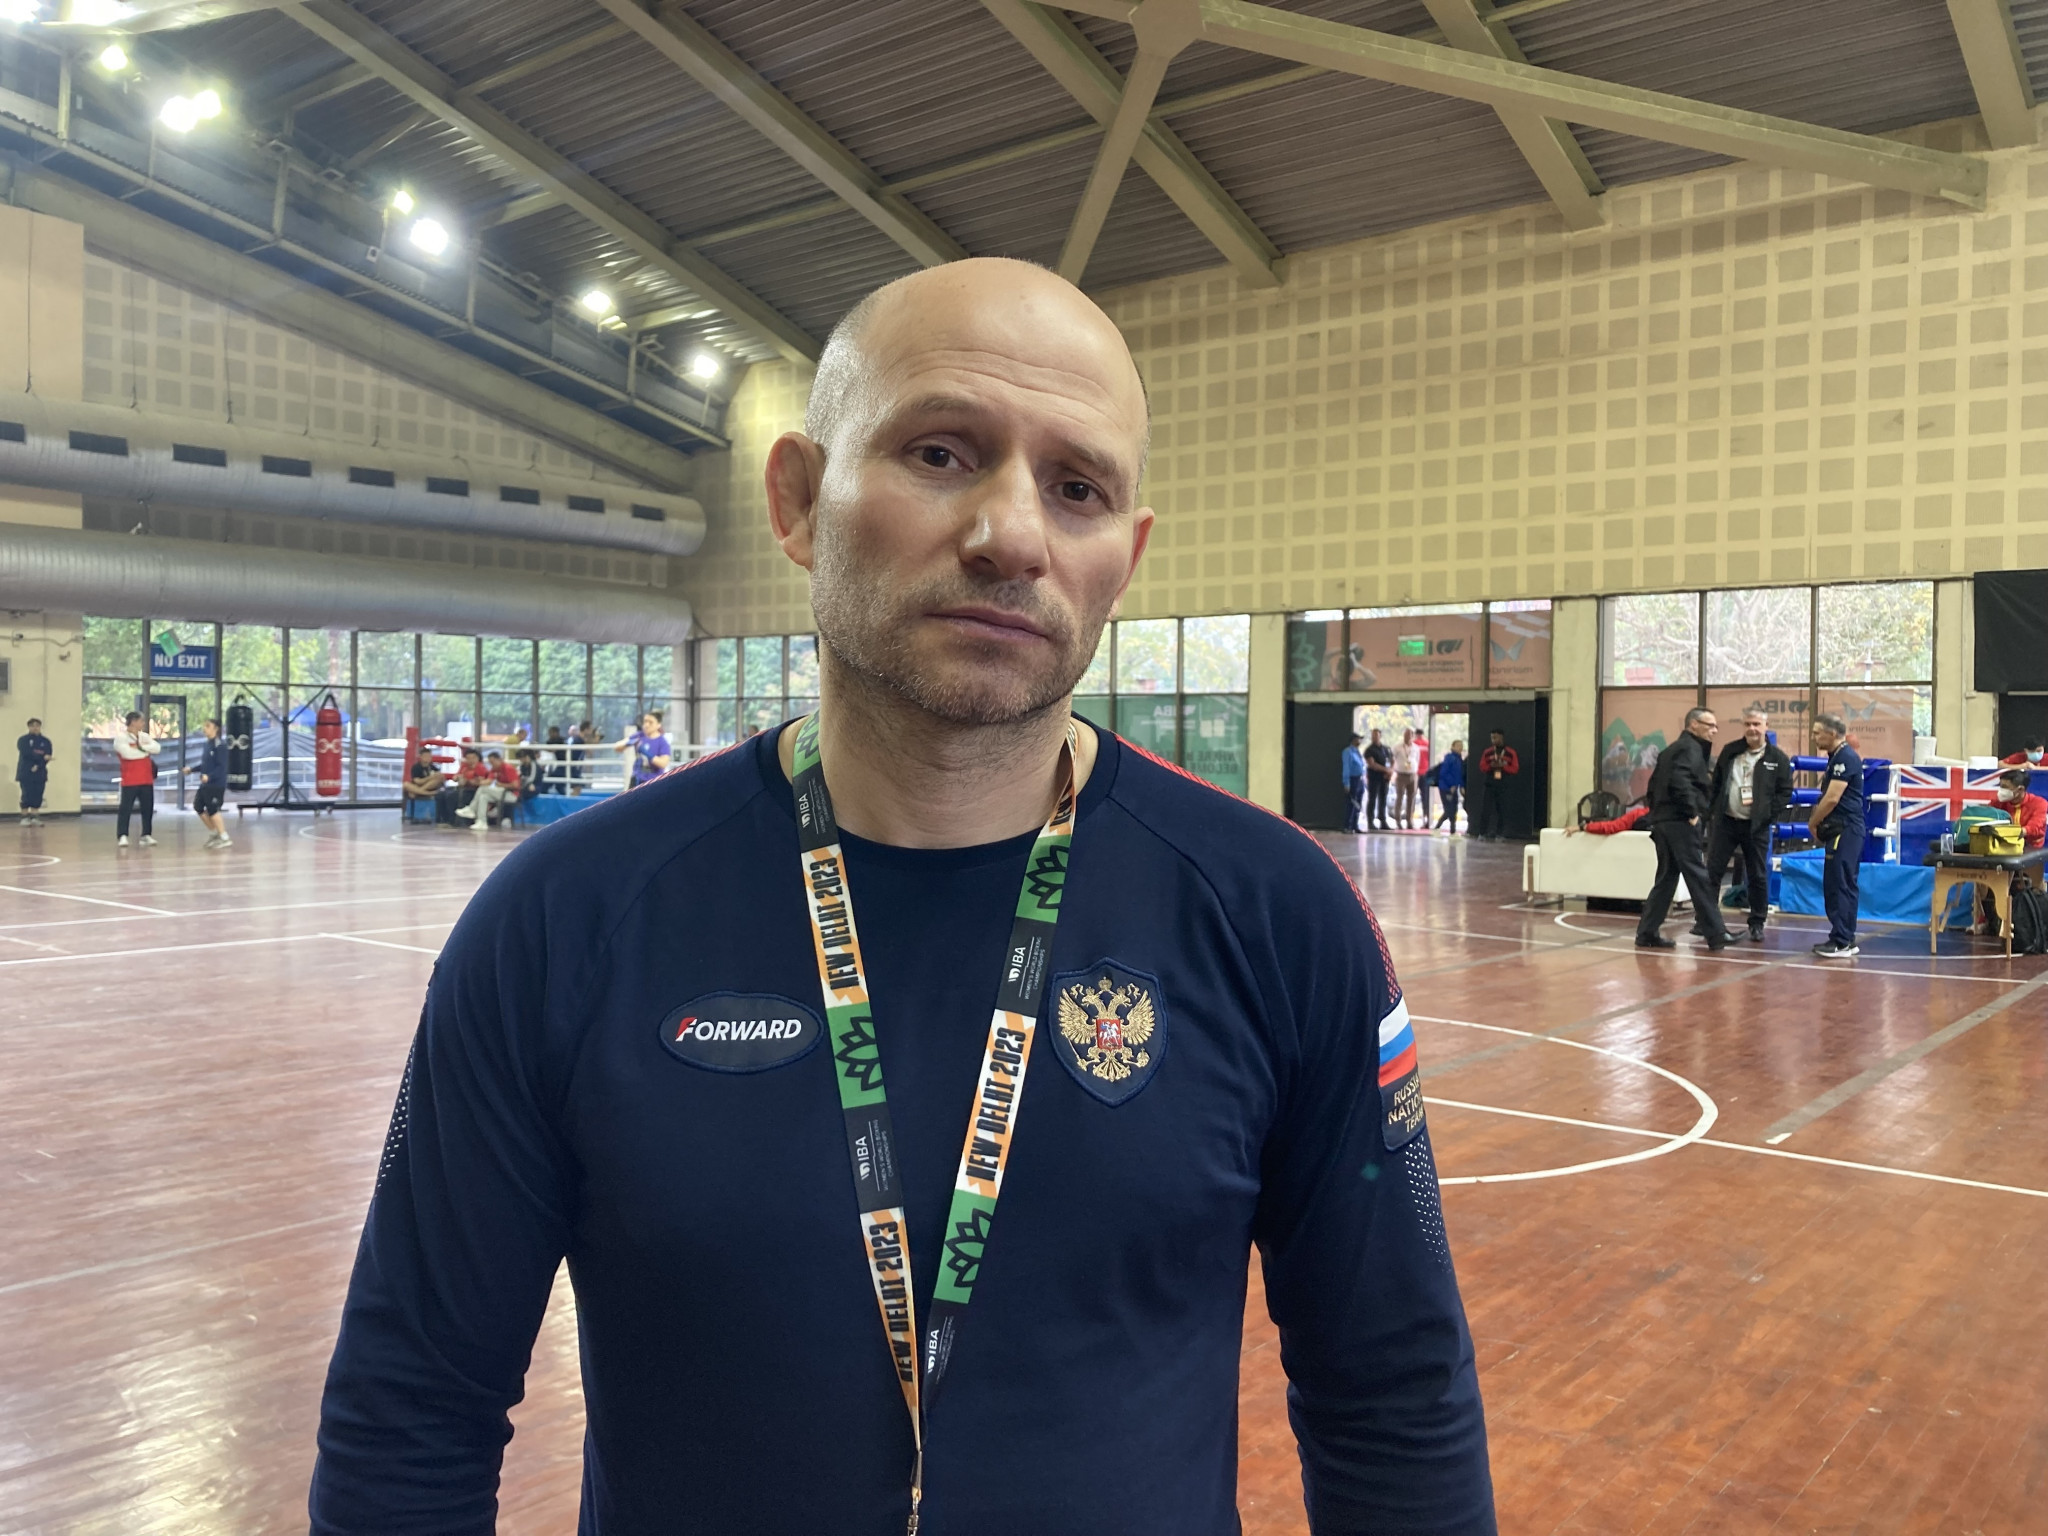 Russian head coach Albert Mutalibov believes other International Federations should follow the IBA's "example" by allowing Russian athletes to participate under their national flag ©ITG